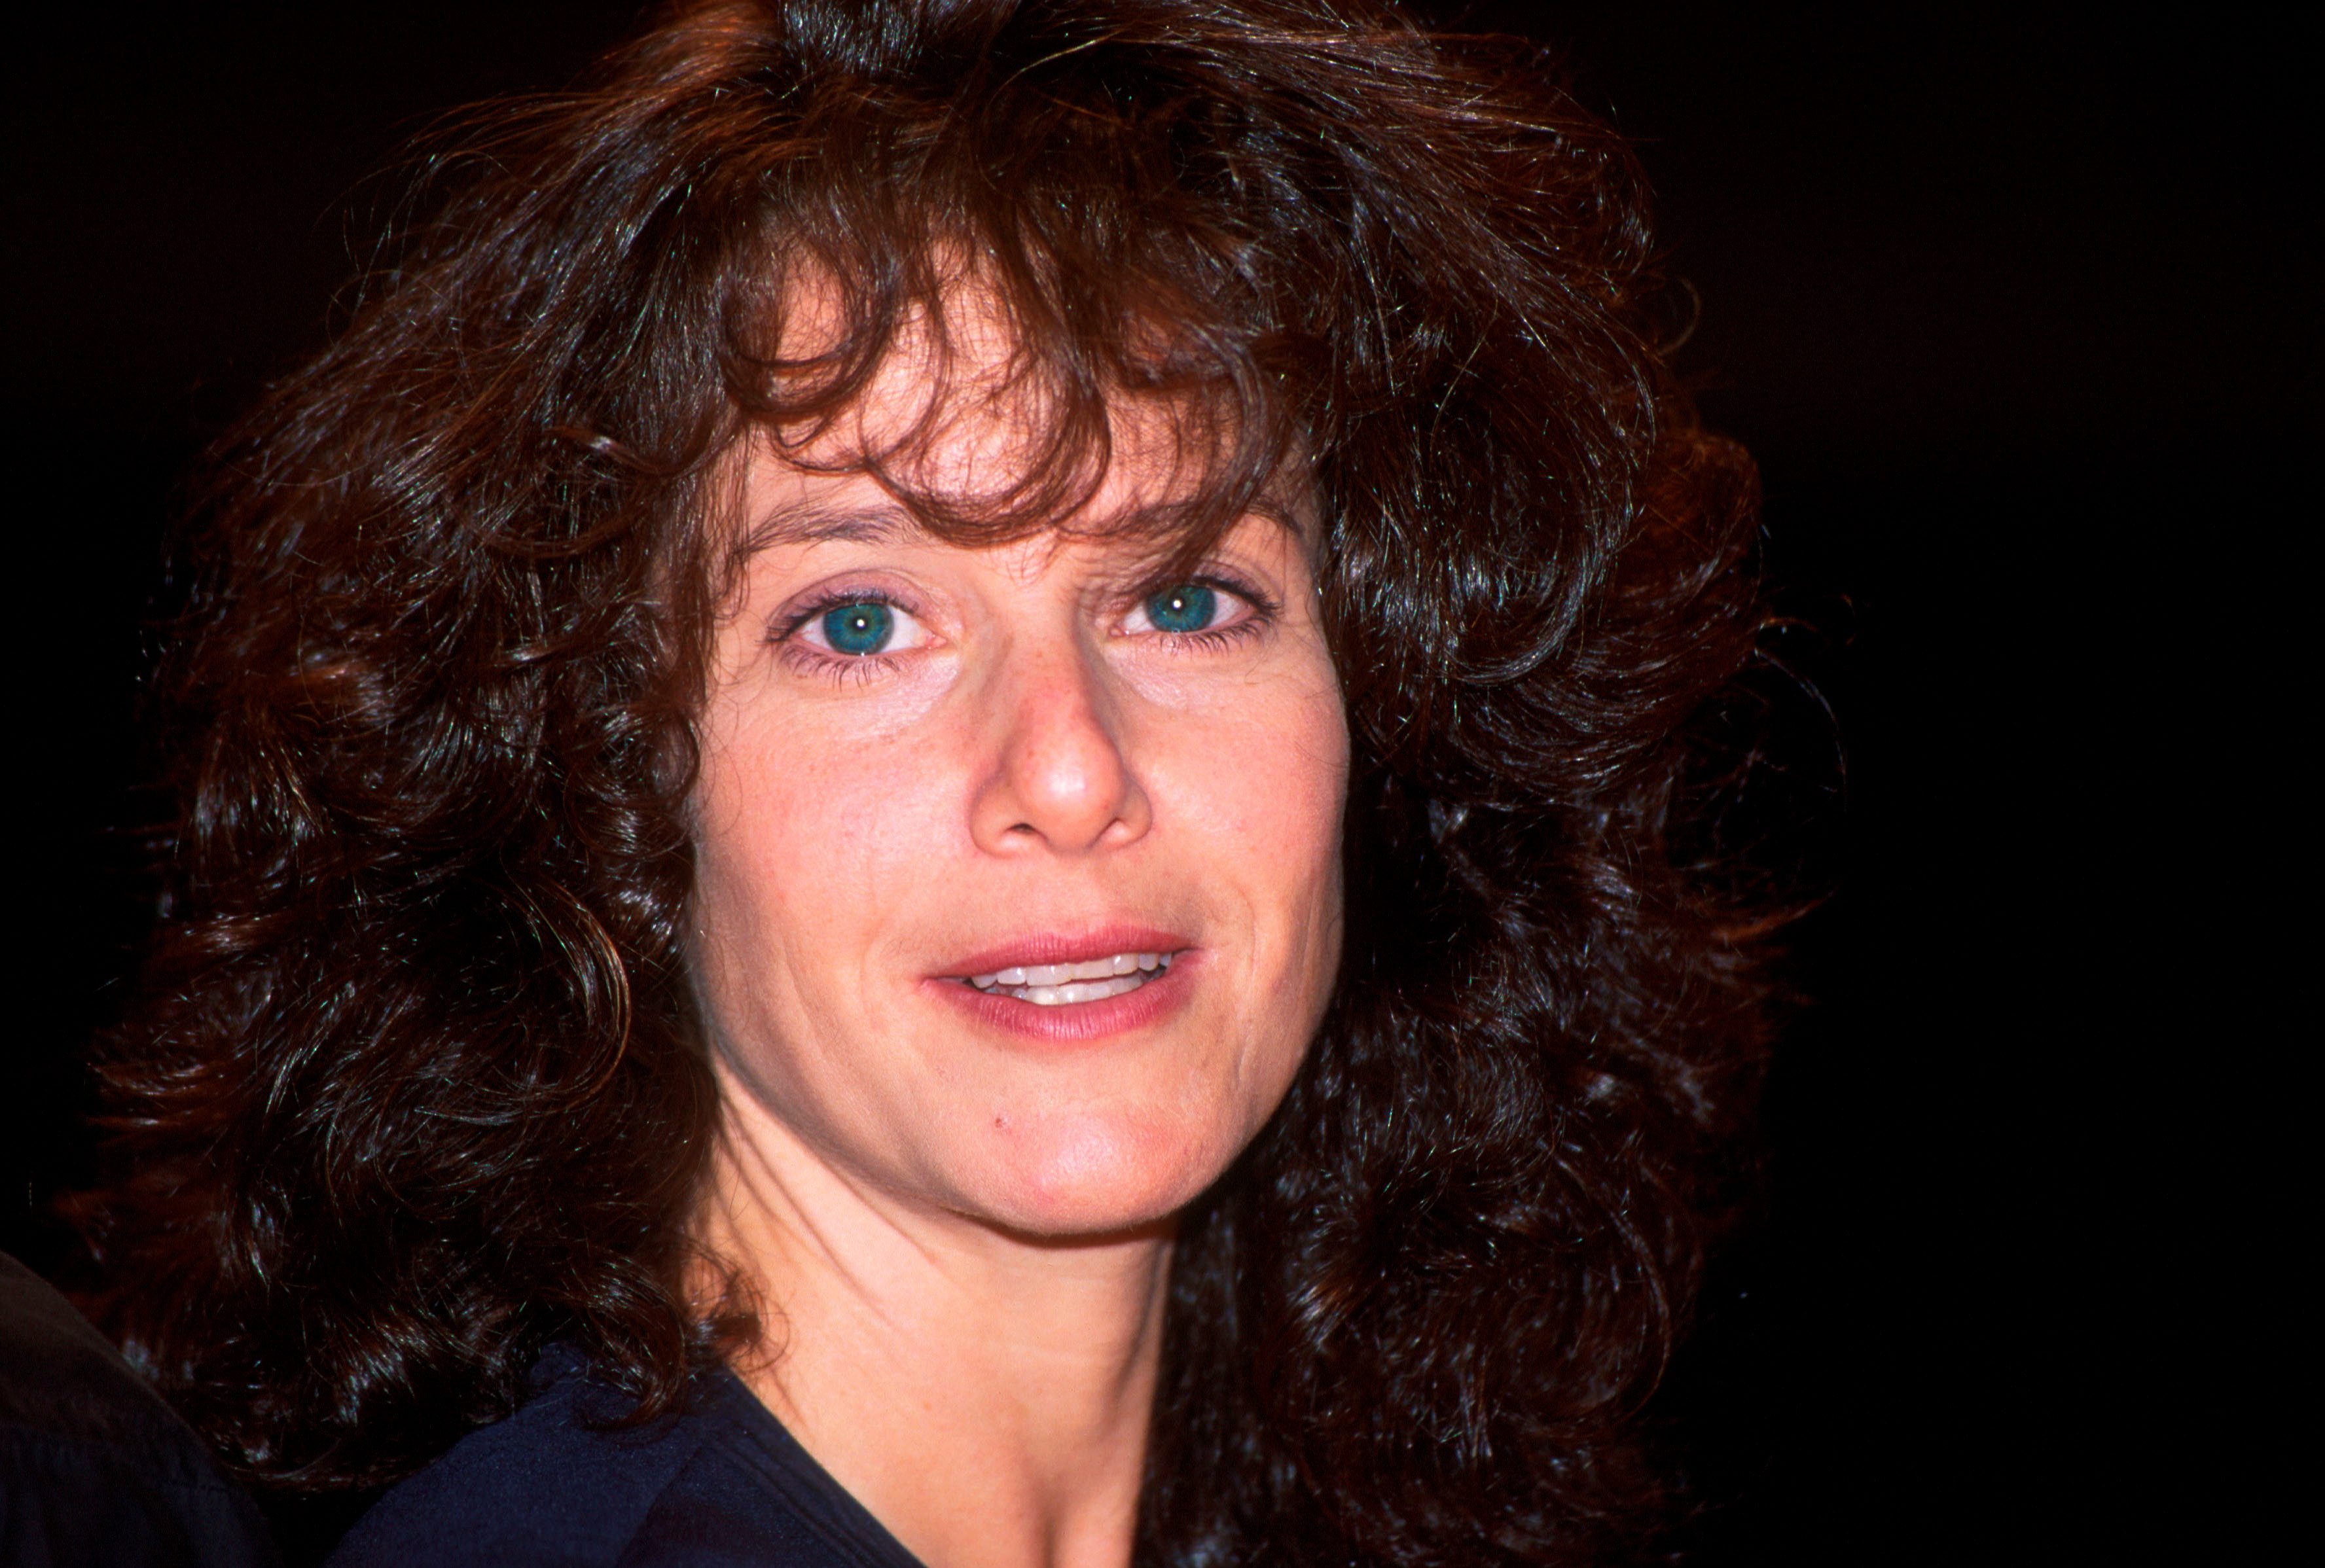 Debra Winger pictured at the Royal Festival Hall on January 1, 1994 in London. | Source: Getty Images